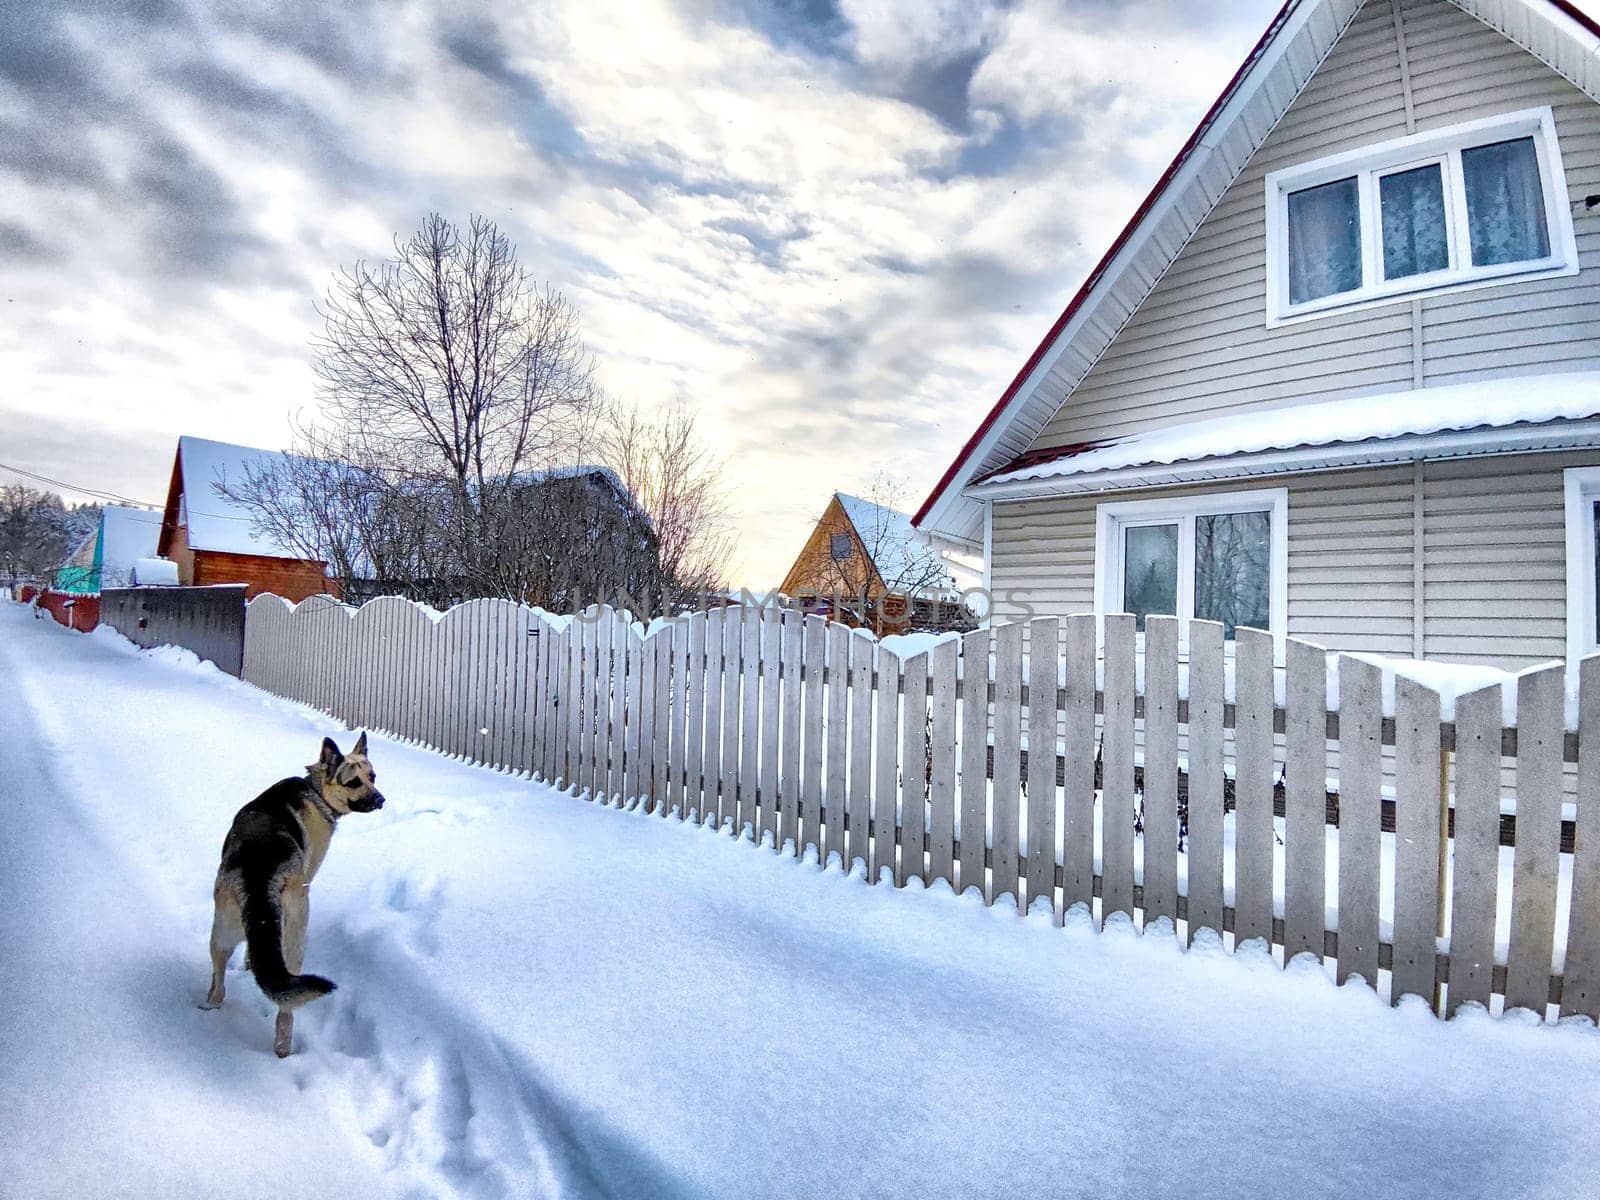 A cozy cottage with snow-covered roof and picket fence, set against a bright winter sky